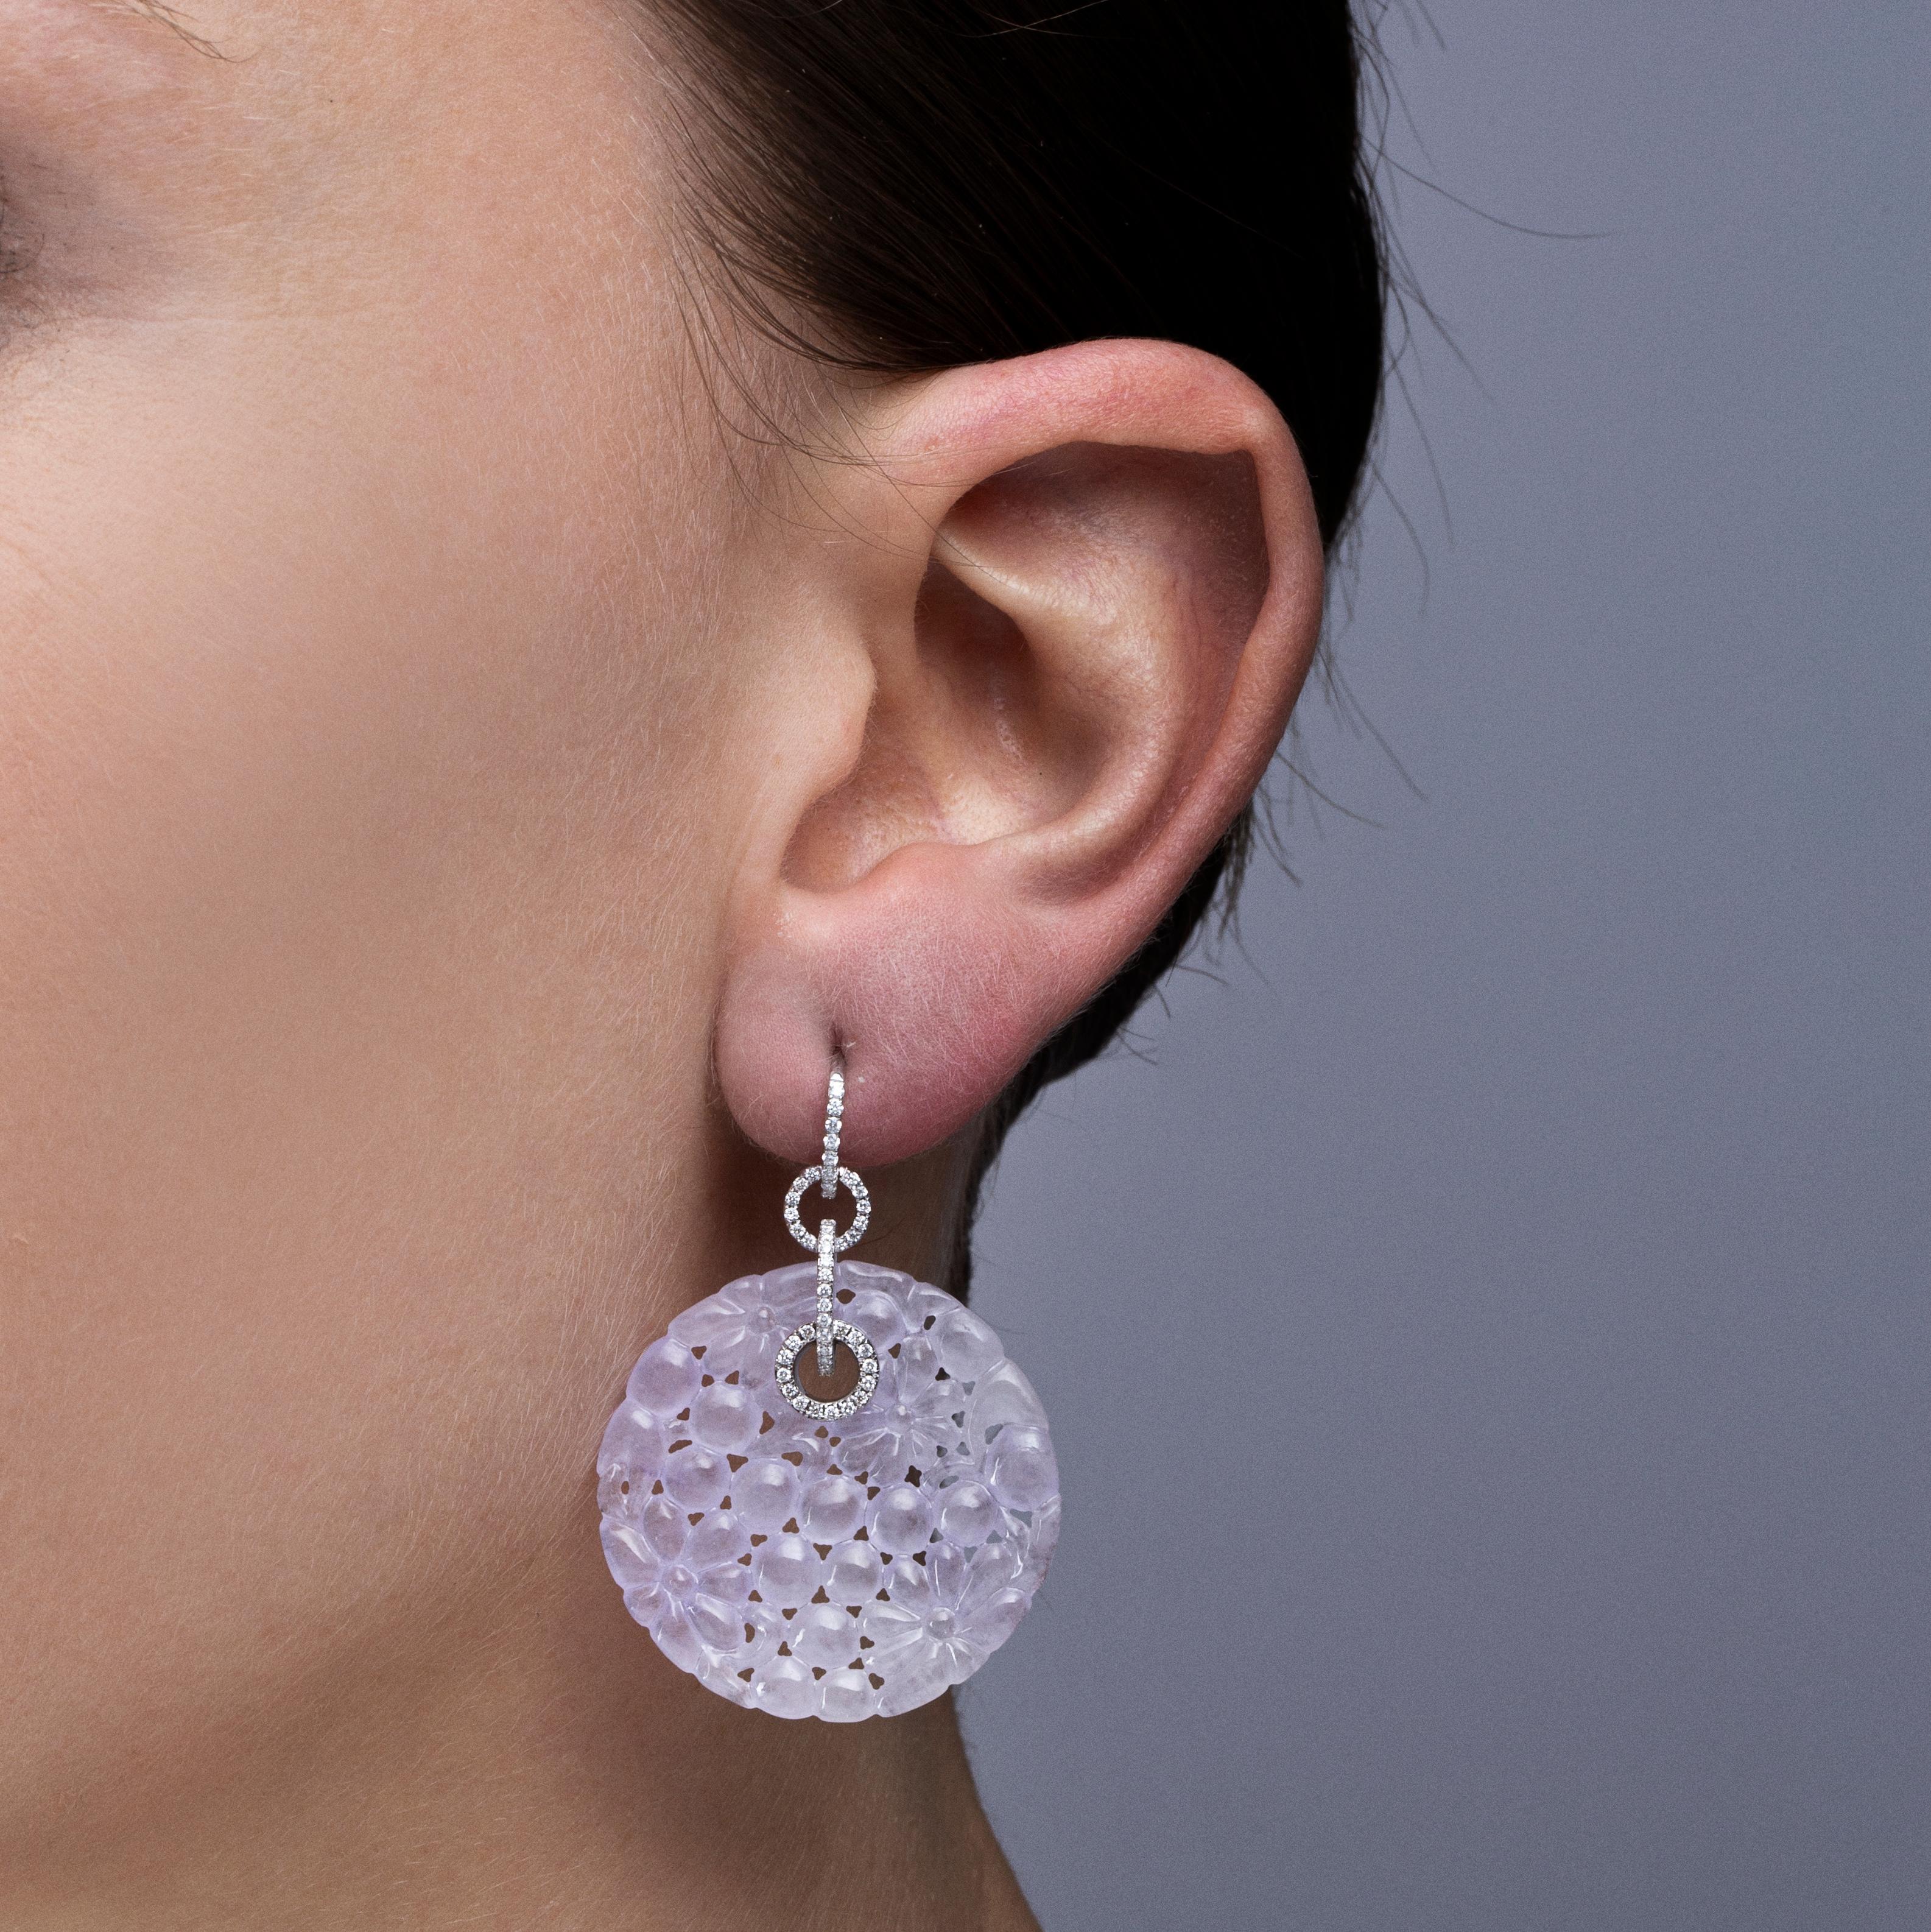 Jona design collection, hand crafted in Italy, One-of-a-Kind 18 karat white gold pendant earrings set with 106 white diamonds weighing 0,42 carats, suspending two carved Lavender Jade discs weighing 55.5 carats.
Dimensions: H 1.63 in x Dm 1.27 in x